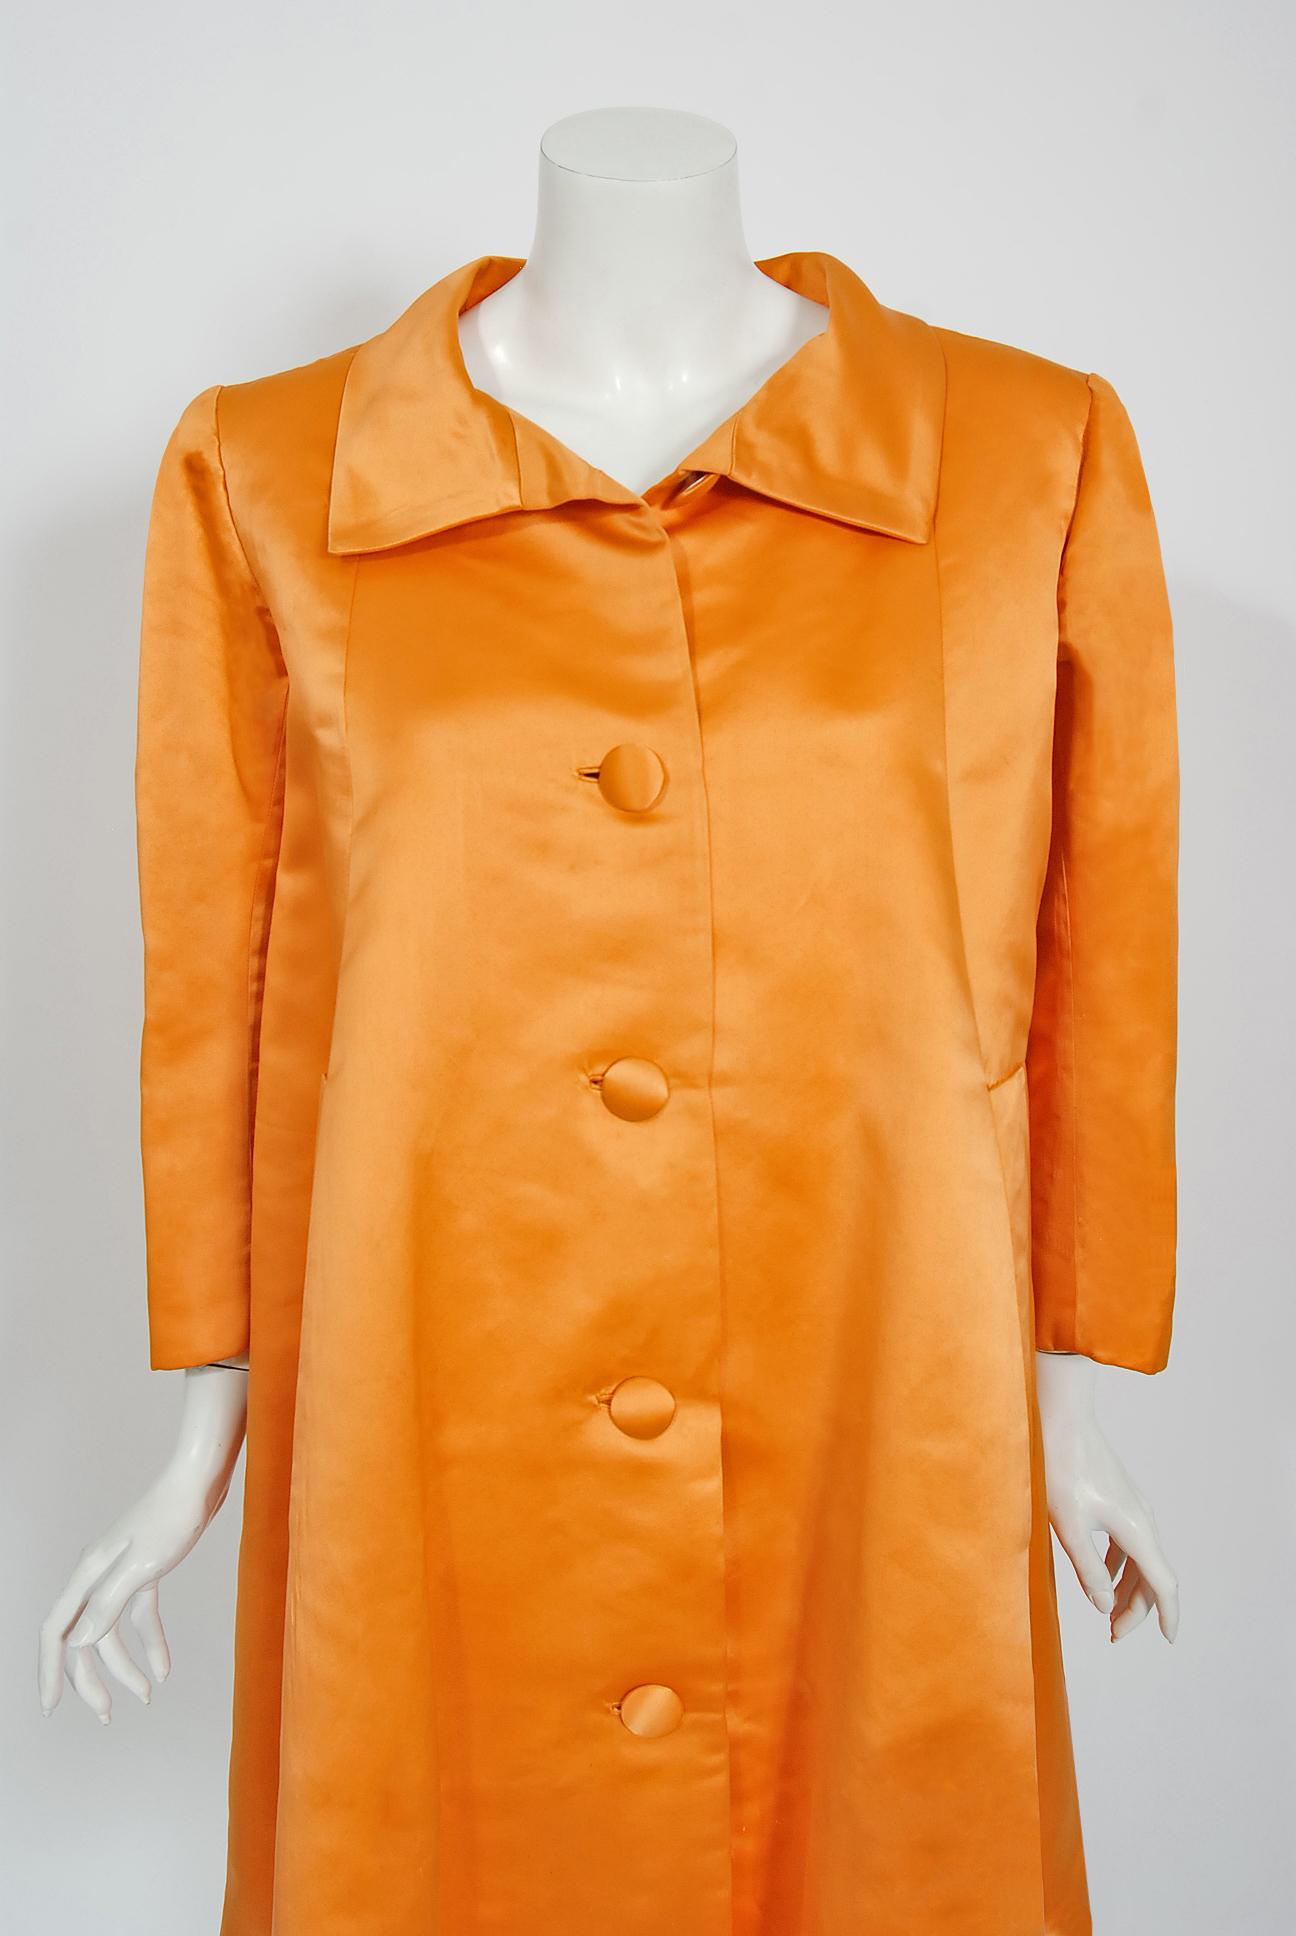 Stunning Balenciaga haute couture sunkist orange duchess satin swing coat dating back to his 1958 collection. Cristobal Balenciaga began his life's work in fashion at a very young age. It is fabled that the Marquesa de Casa Torres, who was so taken